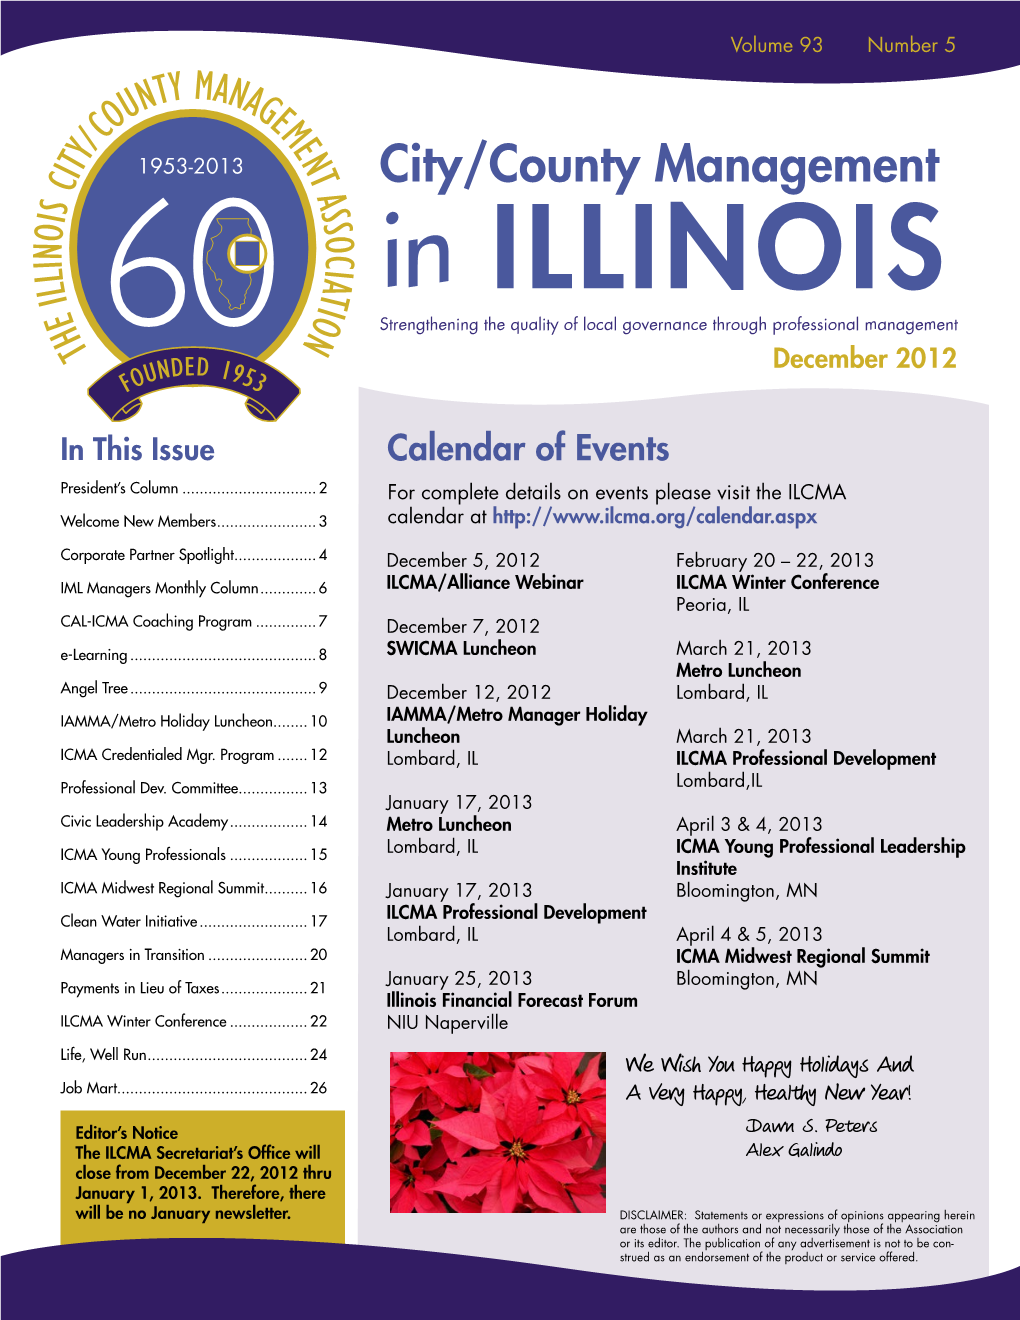 In ILLINOIS Strengthening the Quality of Local Governance Through Professional Management December 2012